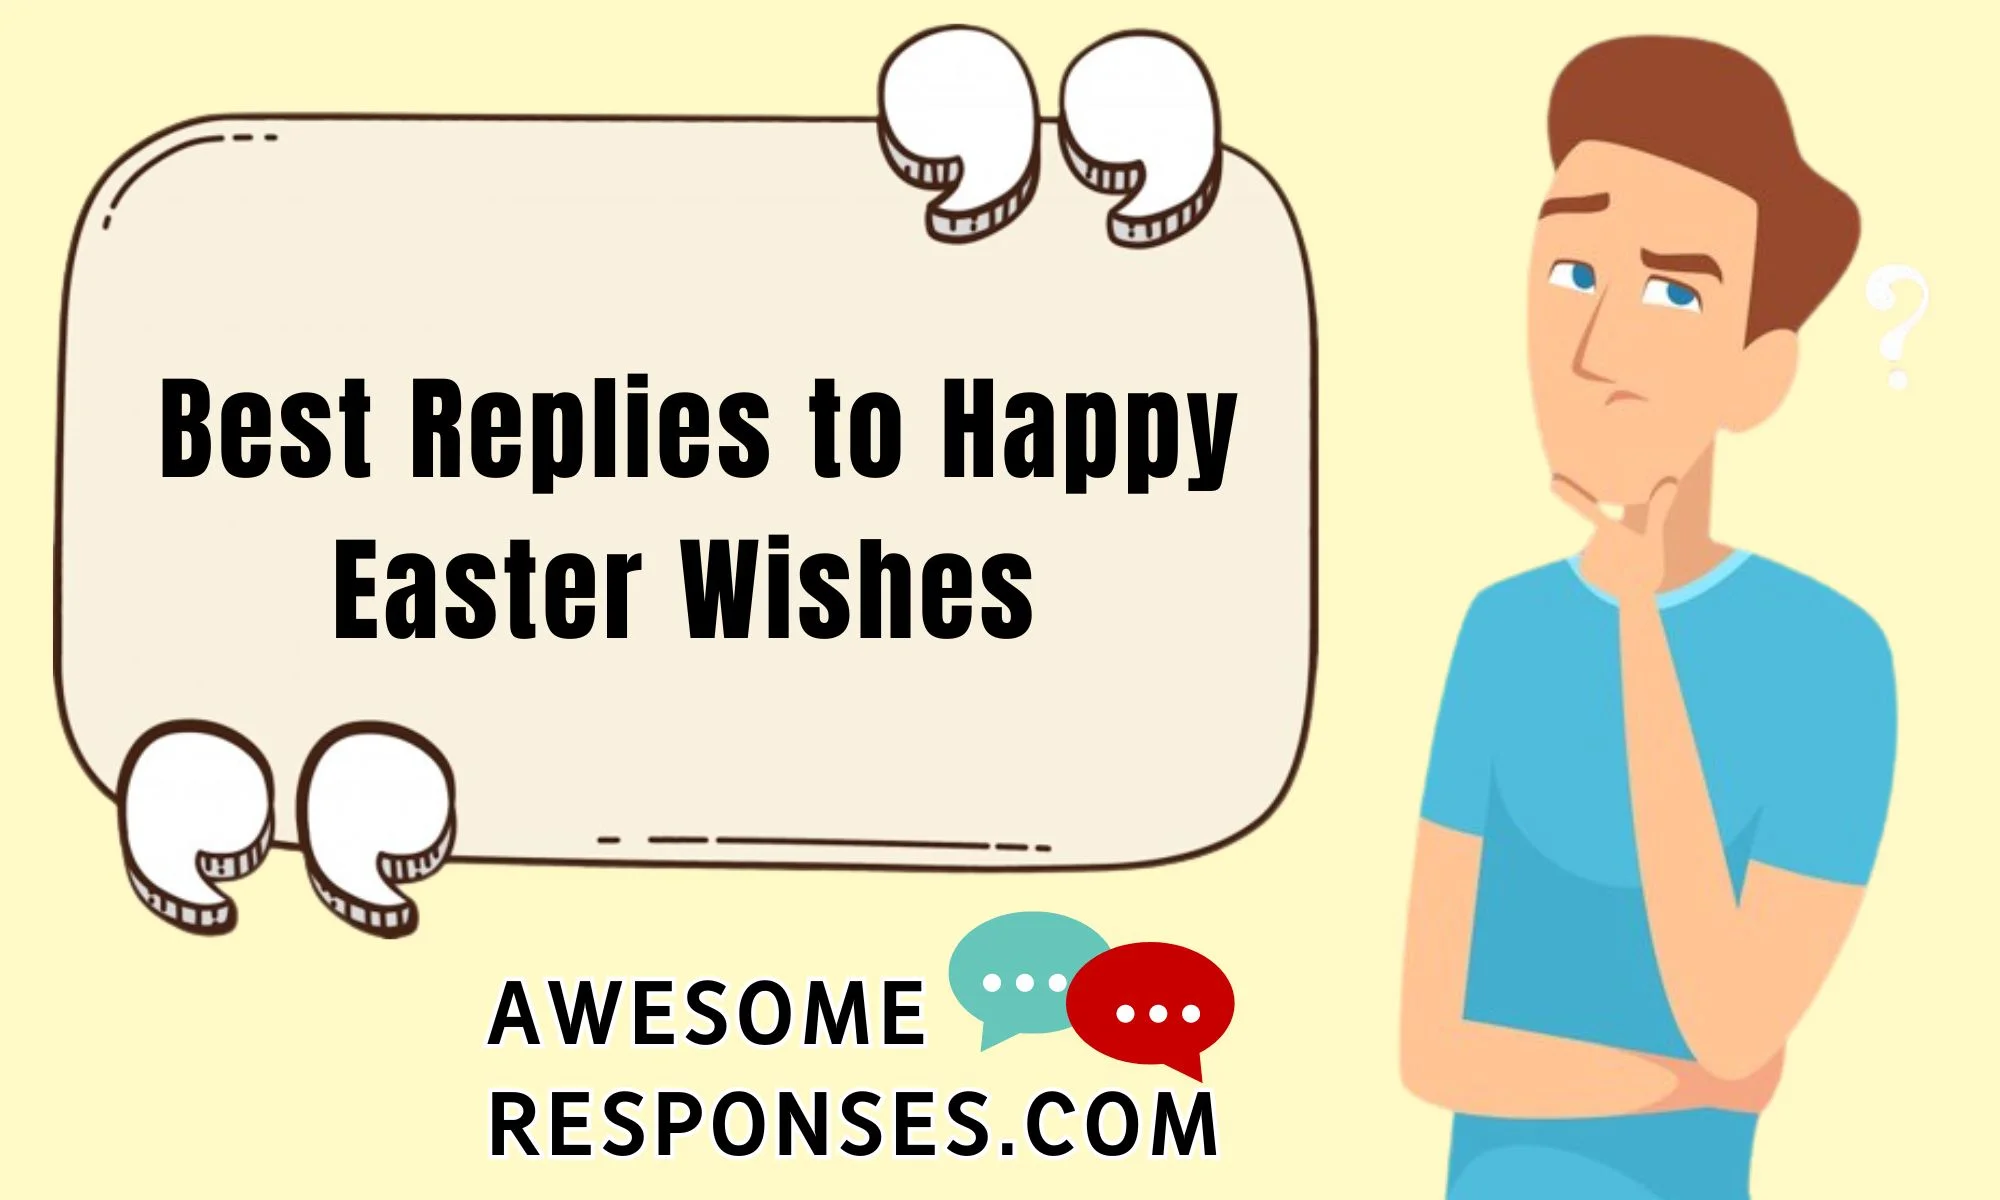 Best Replies to Happy Easter Wishes